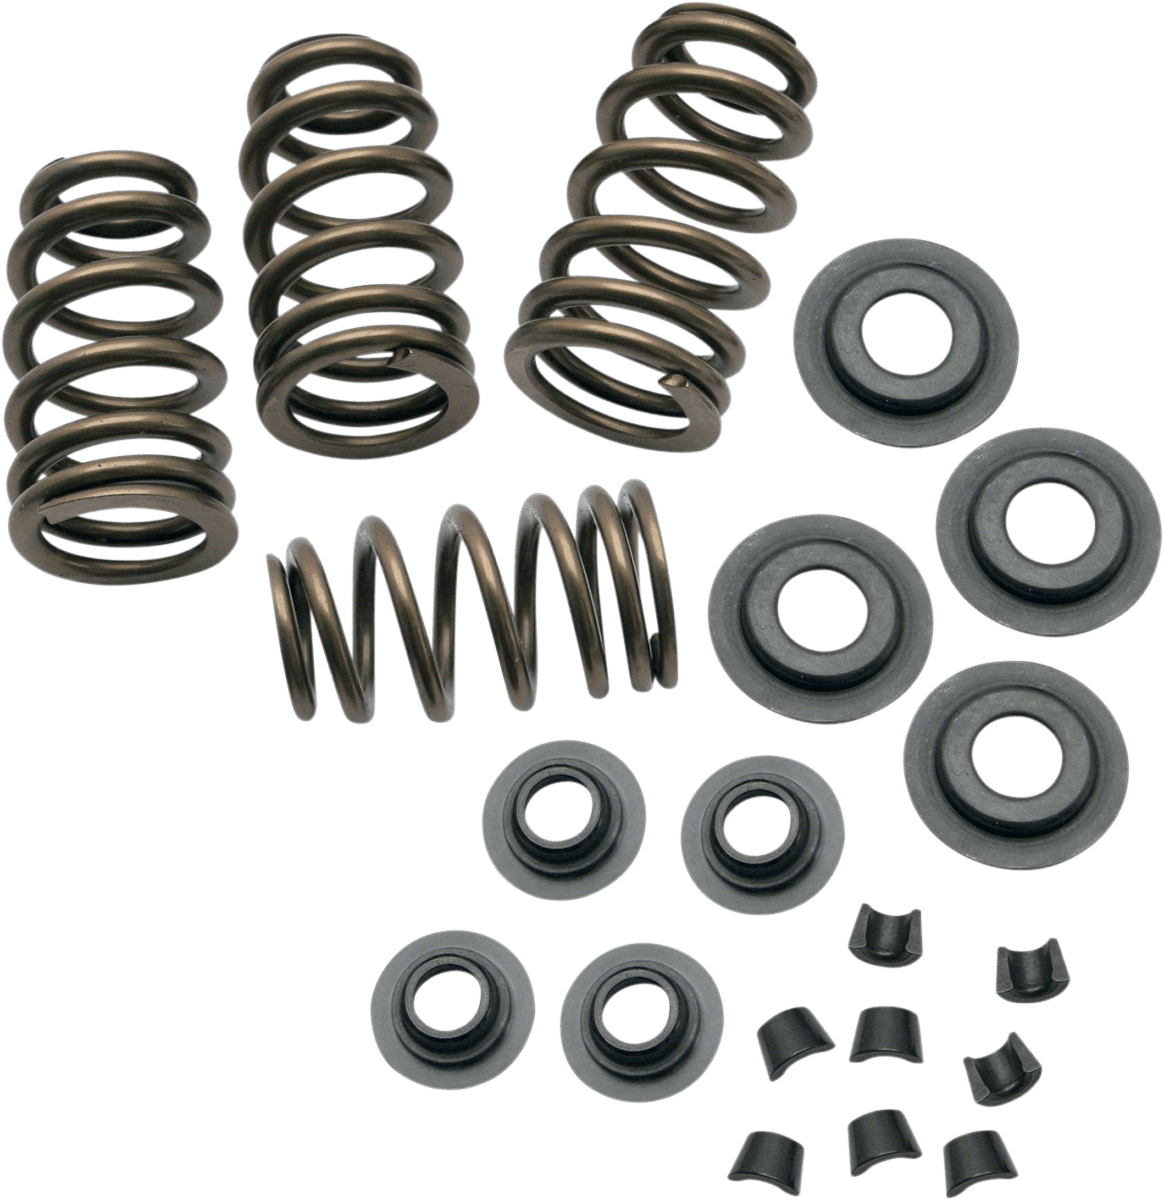 S&S CYCLES-Sidewinder® .650" Valve Spring Kits / '88-'17 Models-Valve Springs / Retainers / Seals-MetalCore Harley Supply